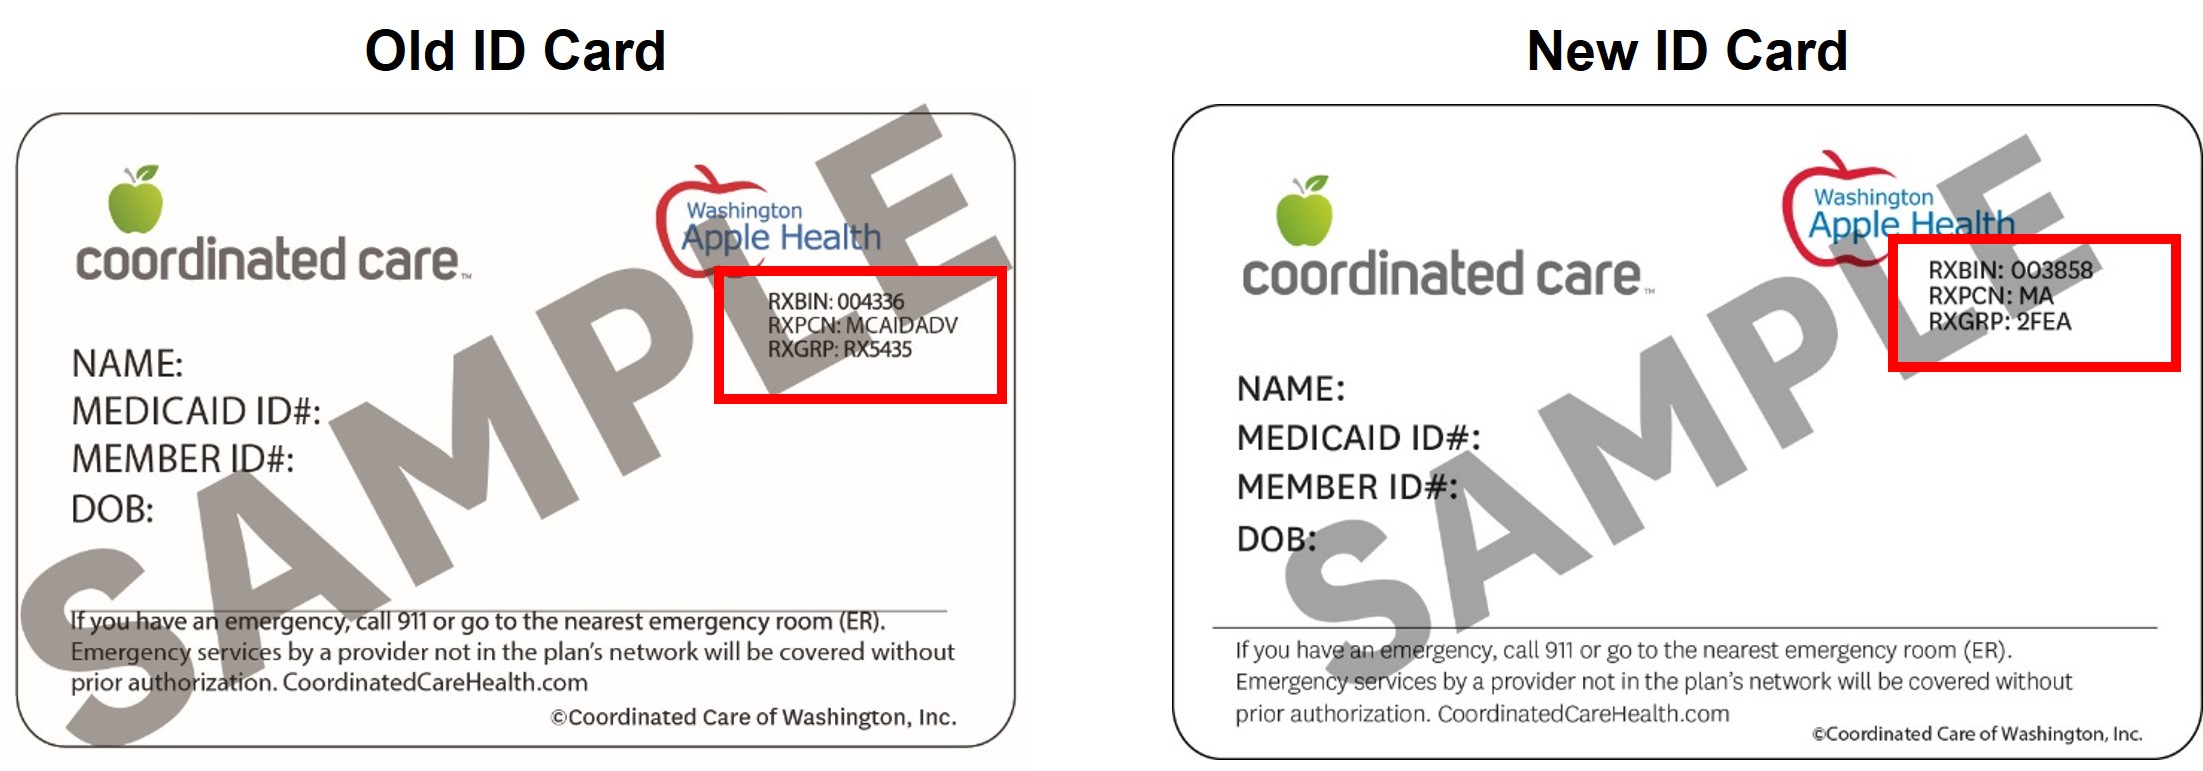 Image of old and new member ID cards with pharmacy information highlighted. Updated pharmacy (Rx) information shown in text.